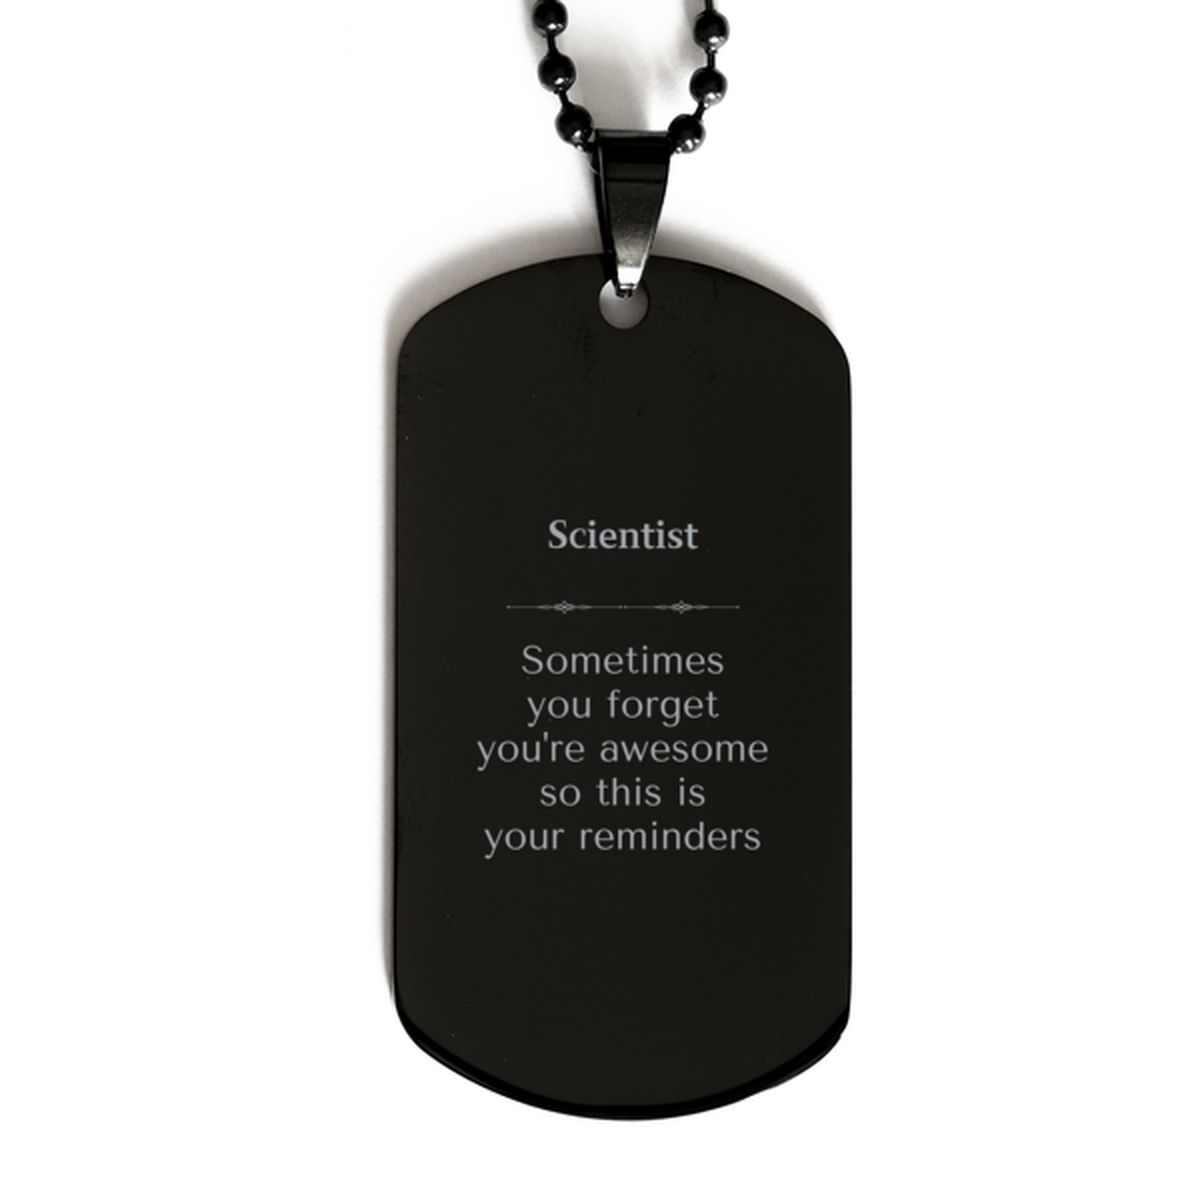 Sentimental Scientist Black Dog Tag, Scientist Sometimes you forget you're awesome so this is your reminders, Graduation Christmas Birthday Gifts for Scientist, Men, Women, Coworkers